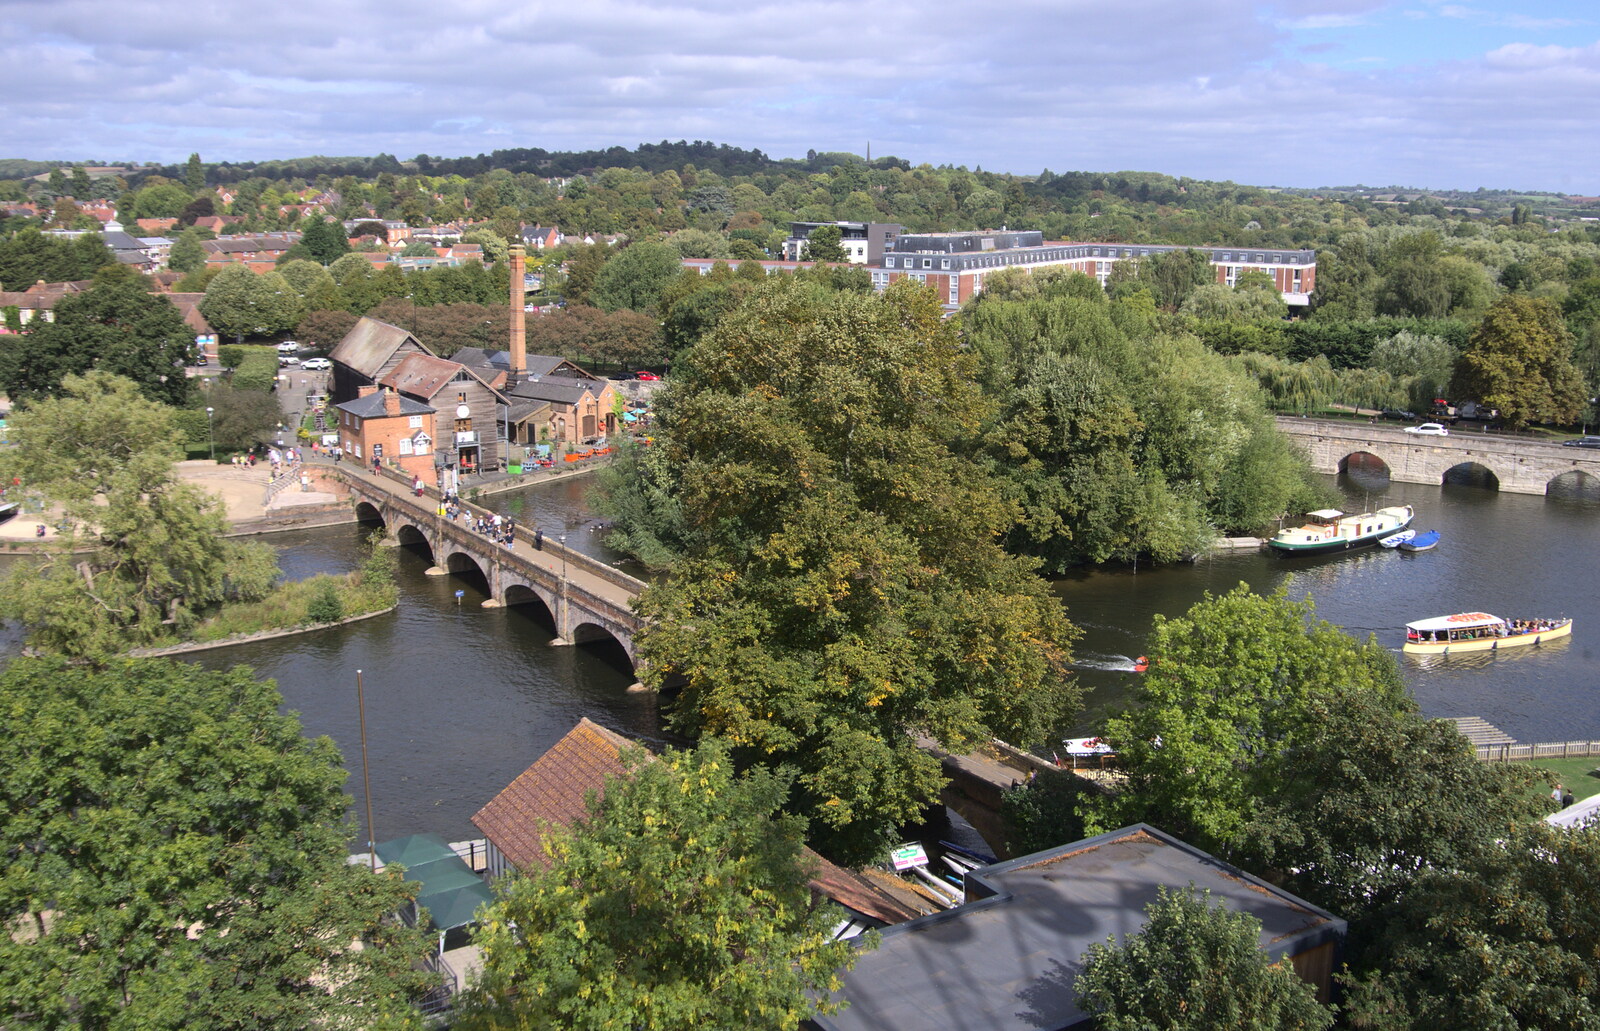 The River Avon, aerial view from A Postcard from Stratford-upon-Avon, Warwickshire - 9th September 2018